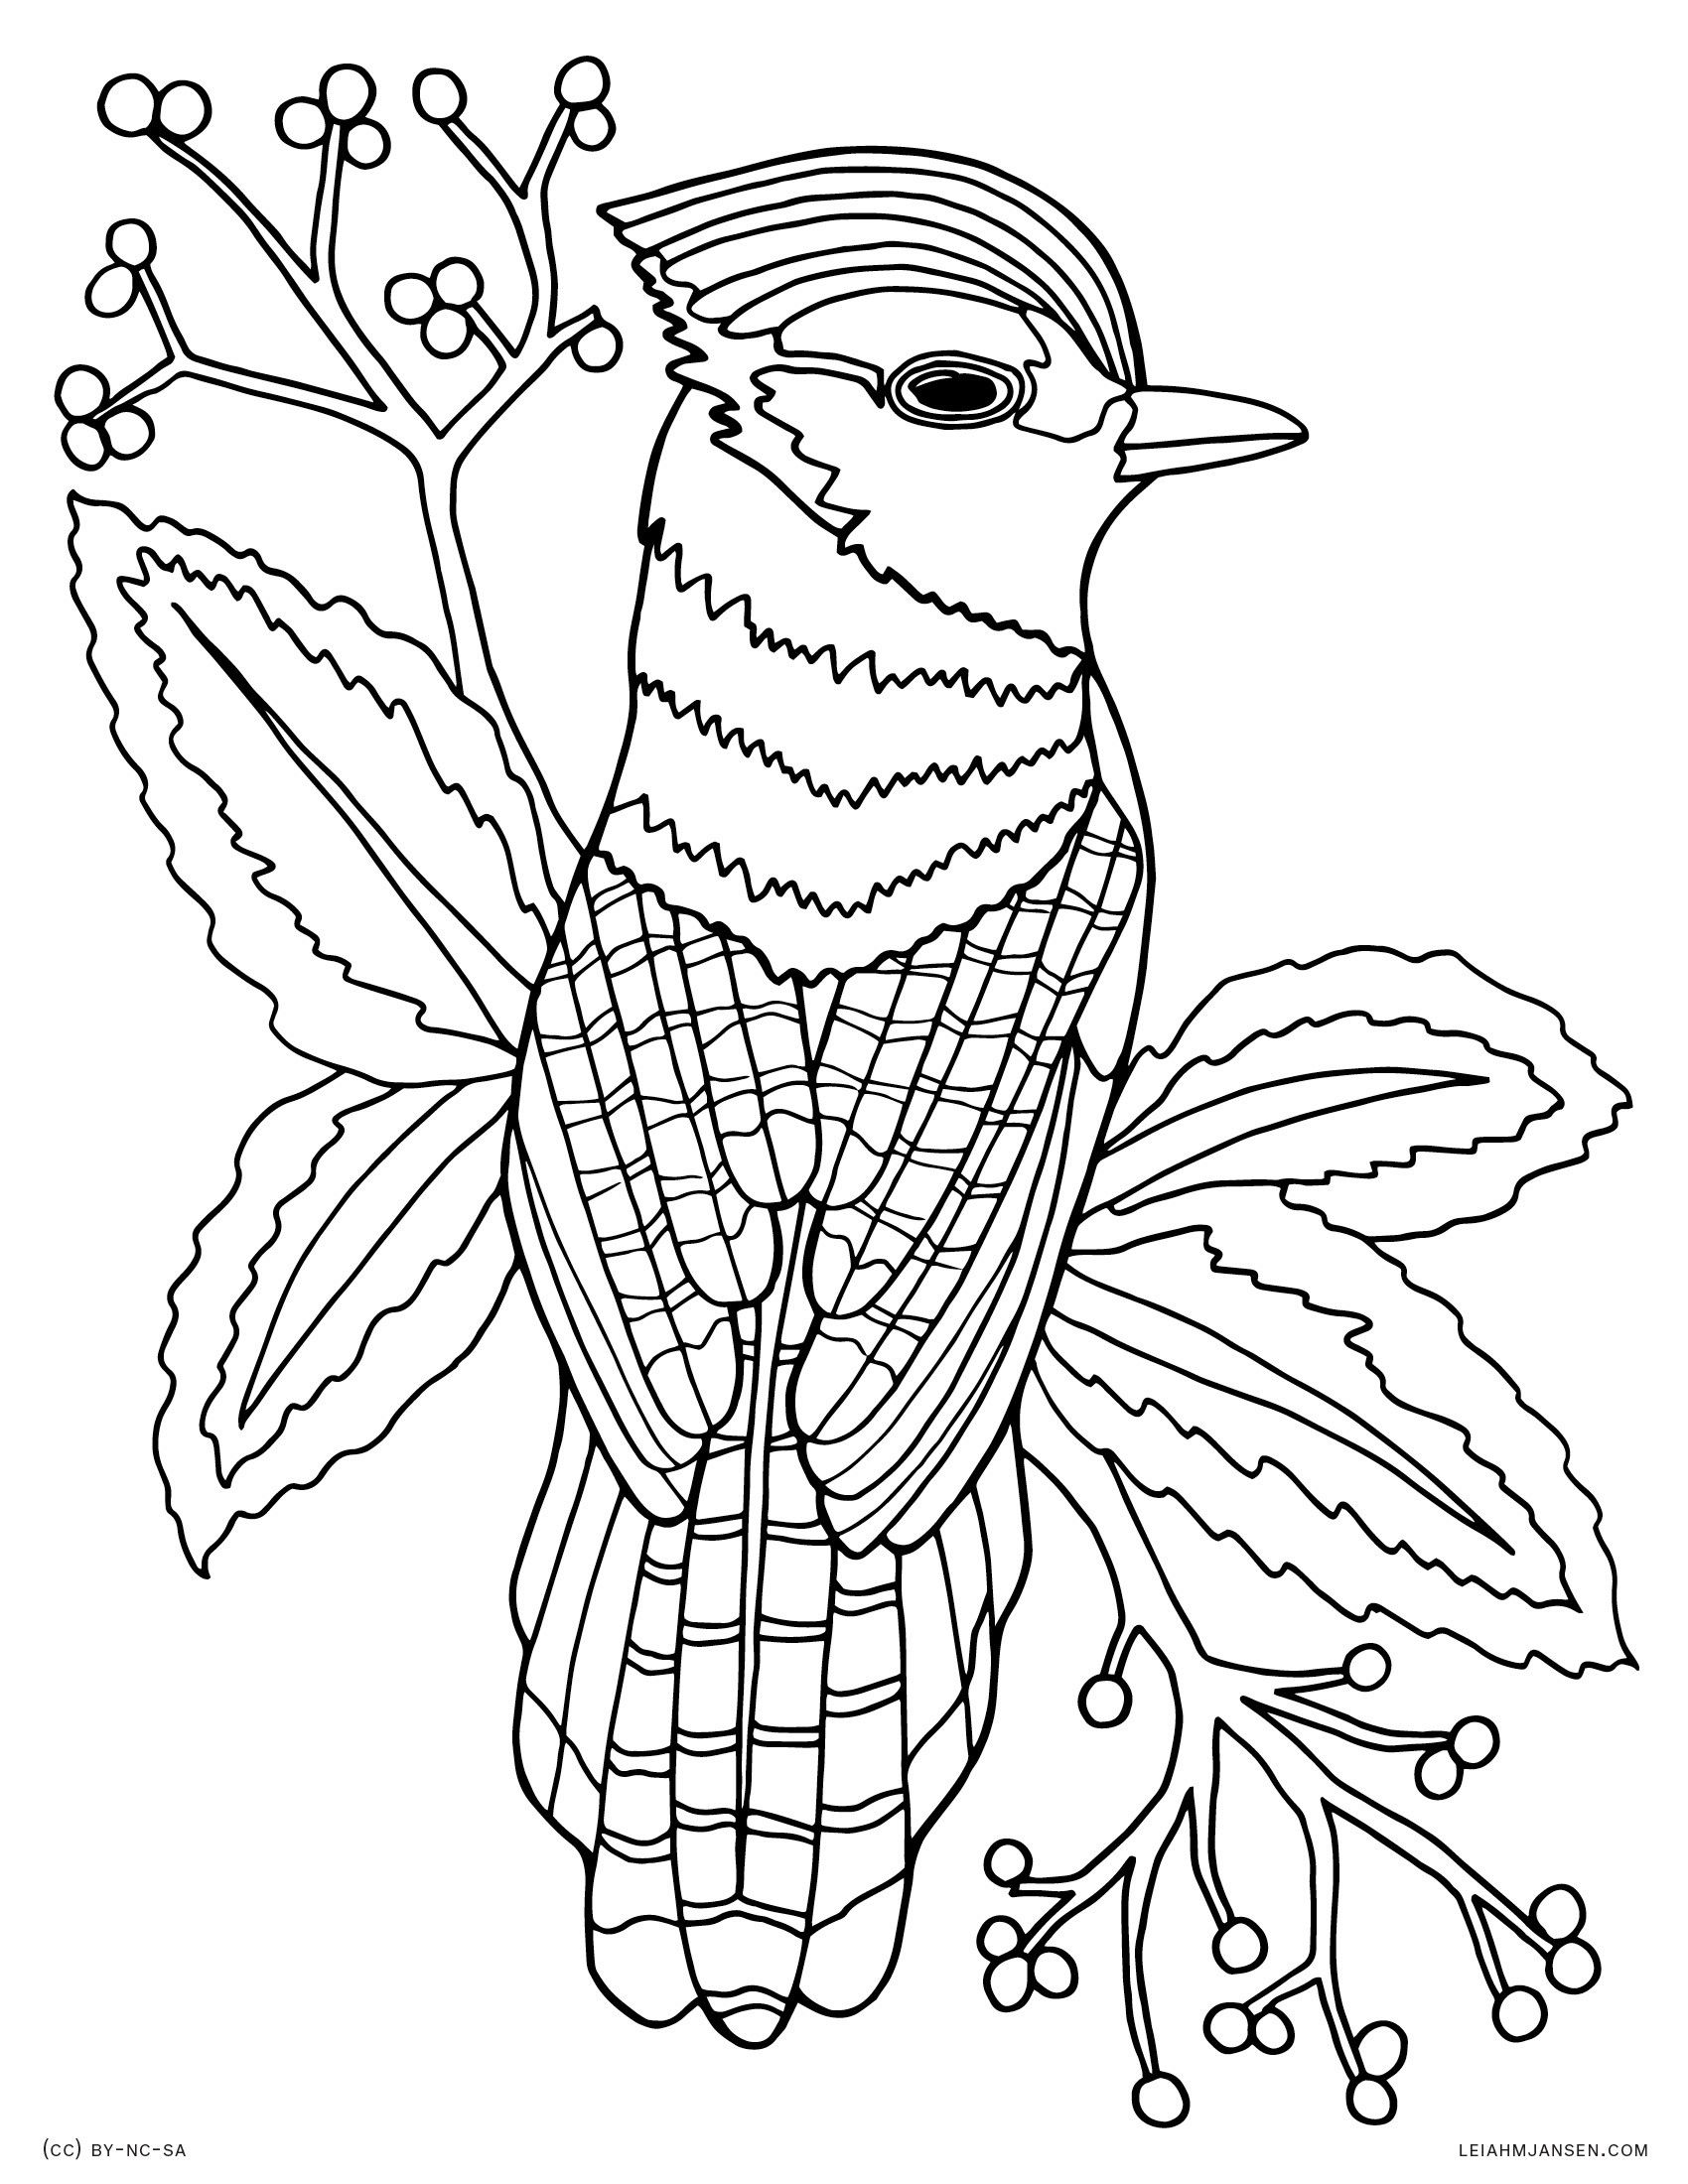 Printable Animal Coloring Pages For Adults
 Coloring Pages